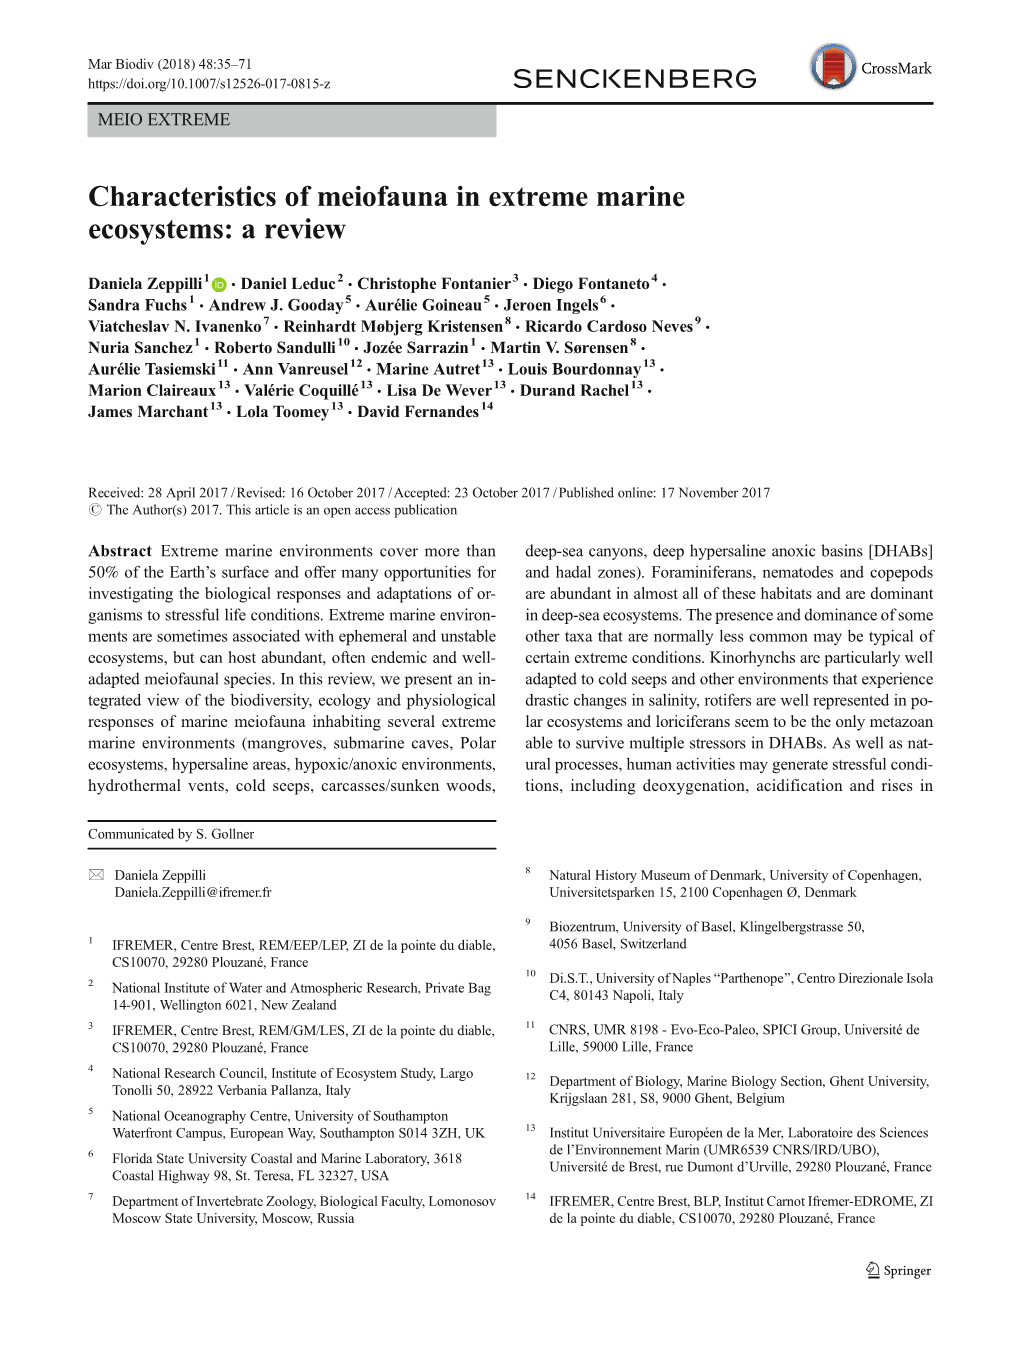 Characteristics of Meiofauna in Extreme Marine Ecosystems: a Review